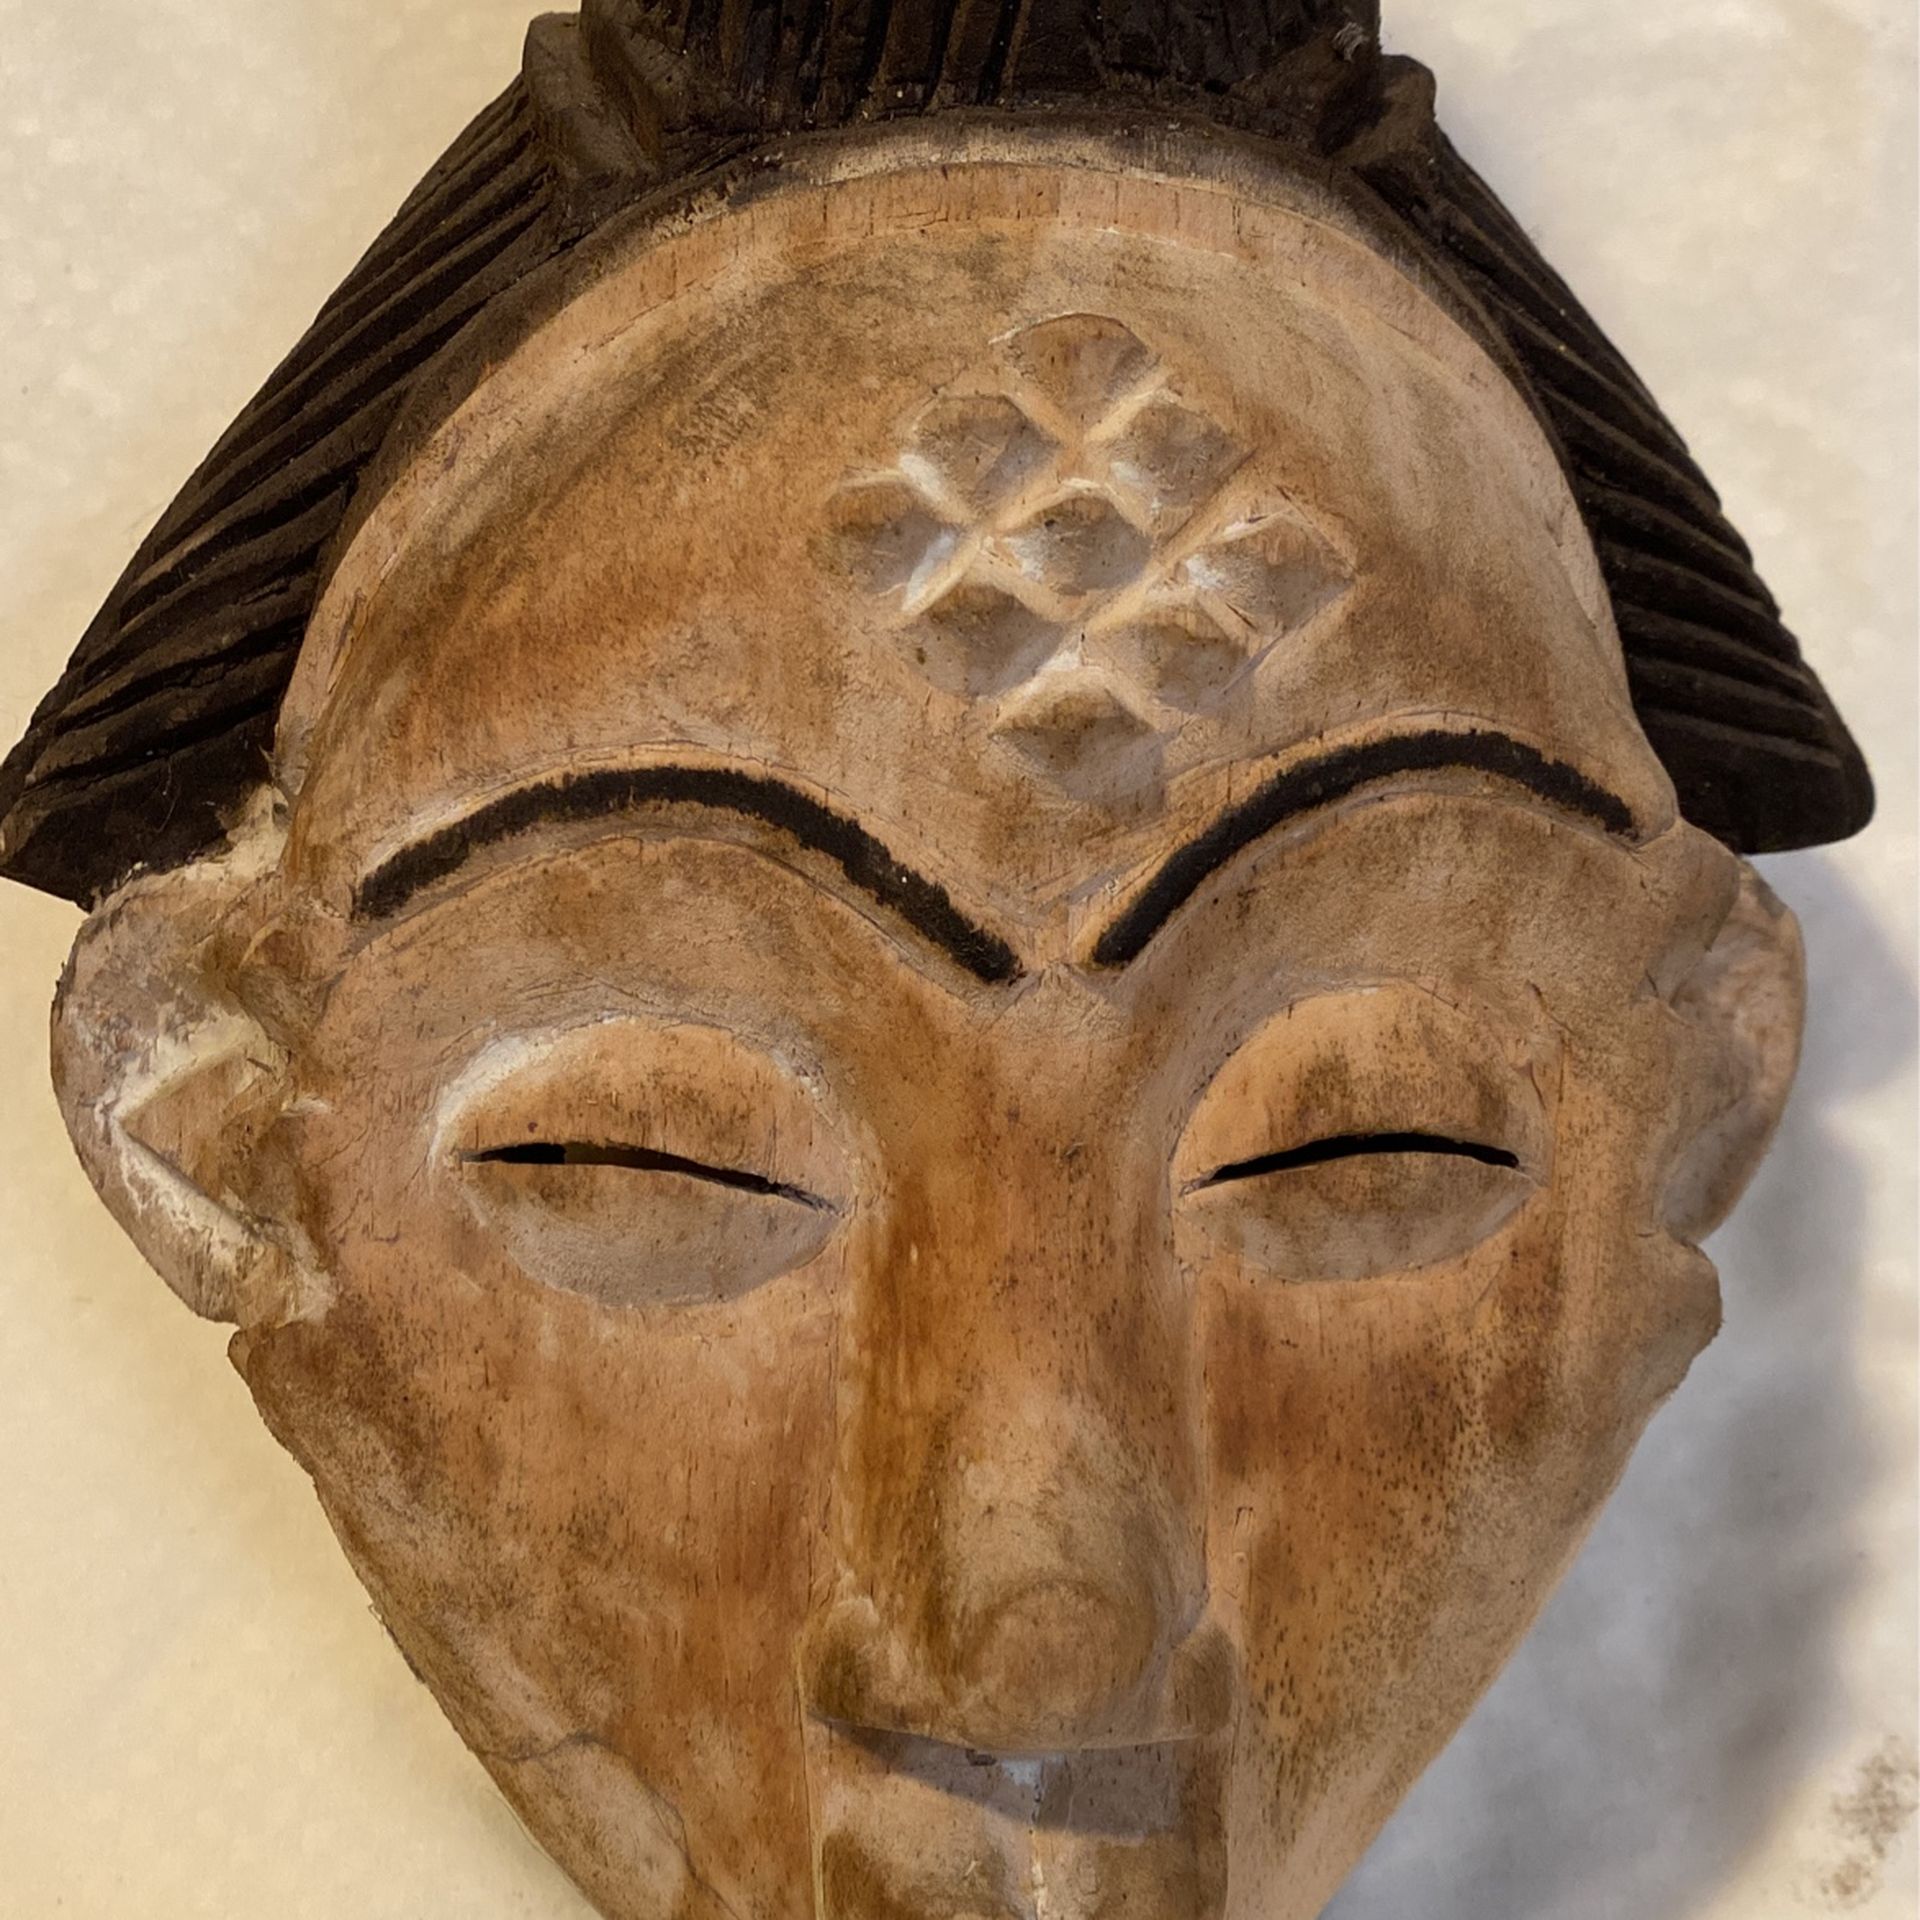 Hand Carved Wood Mask